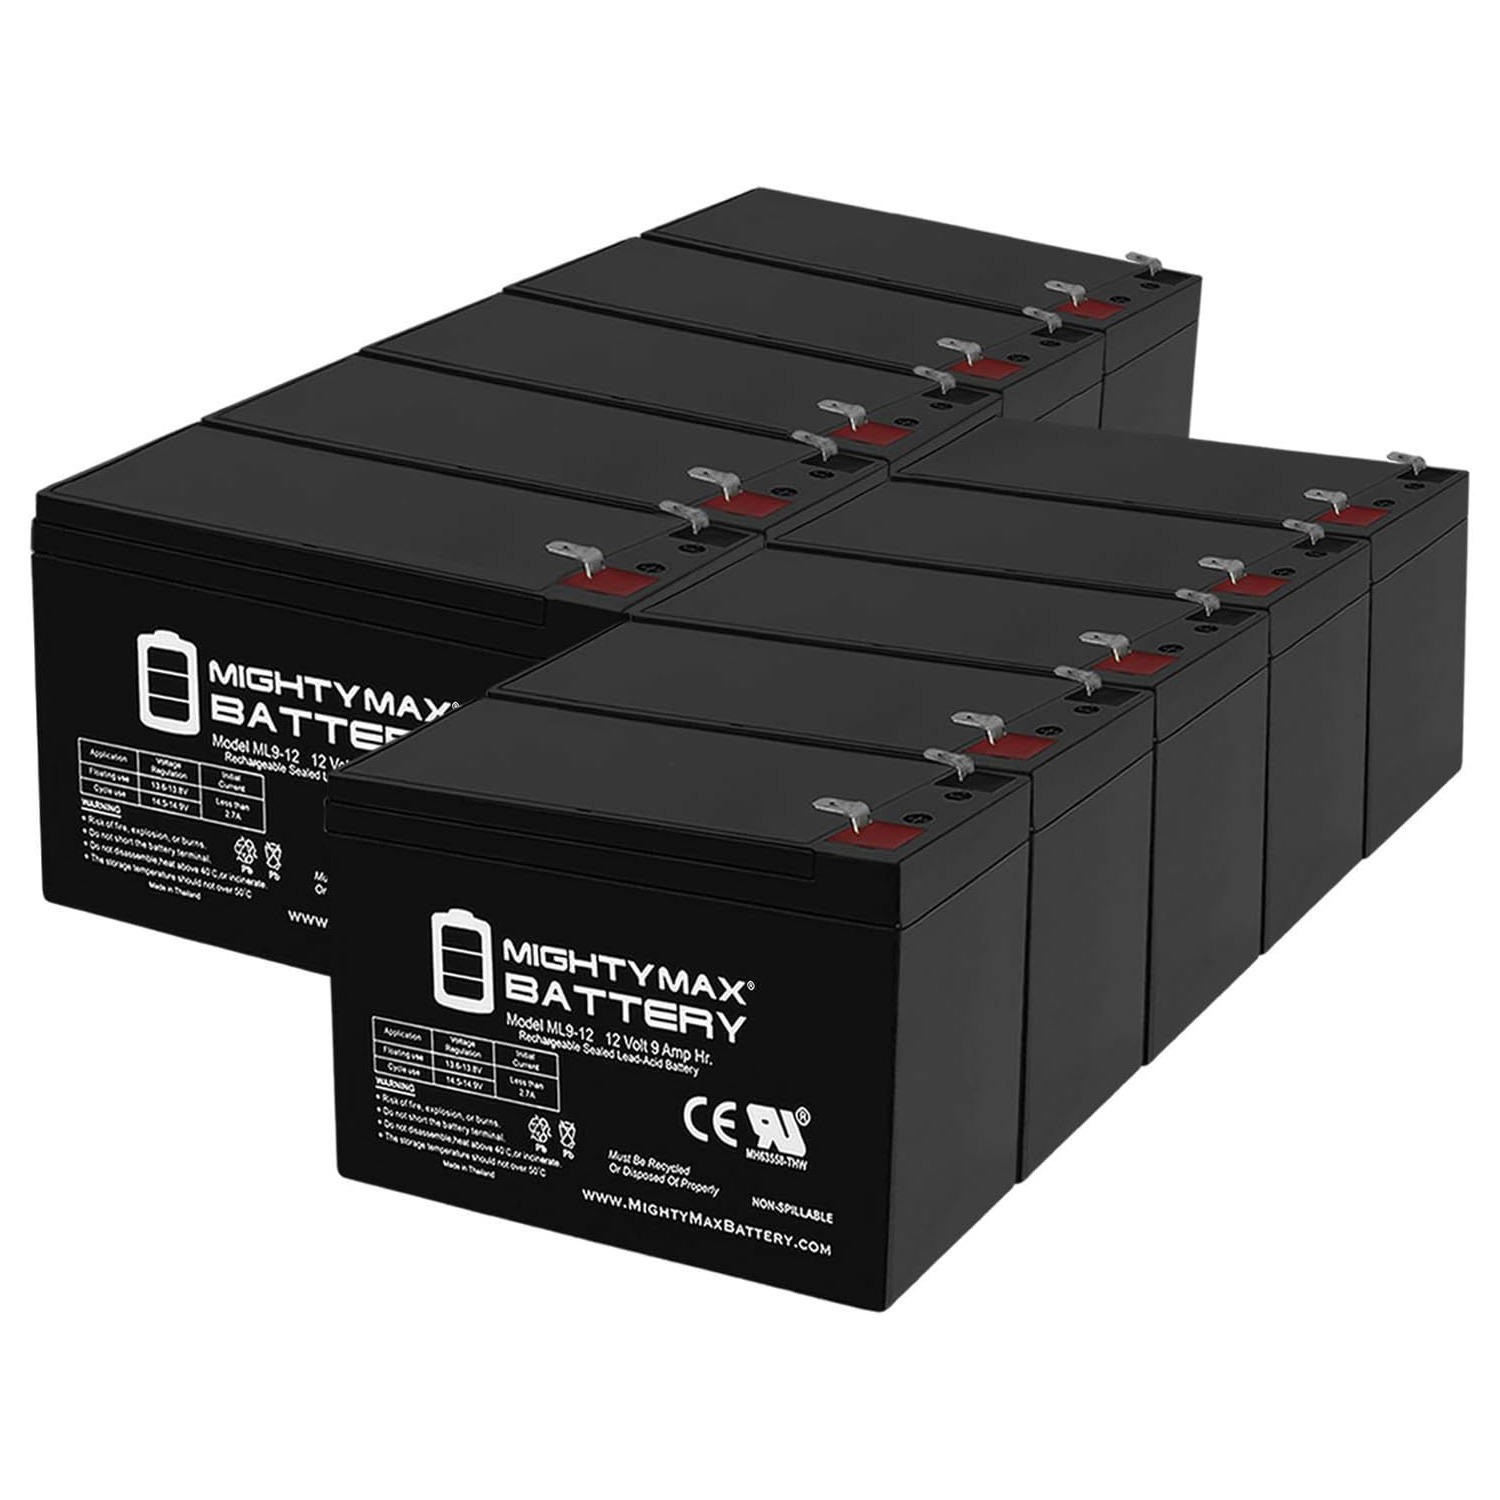 Altronix SMP5PMCTXPD4CB 12V, 9Ah Lead Acid Battery - 10 Pack